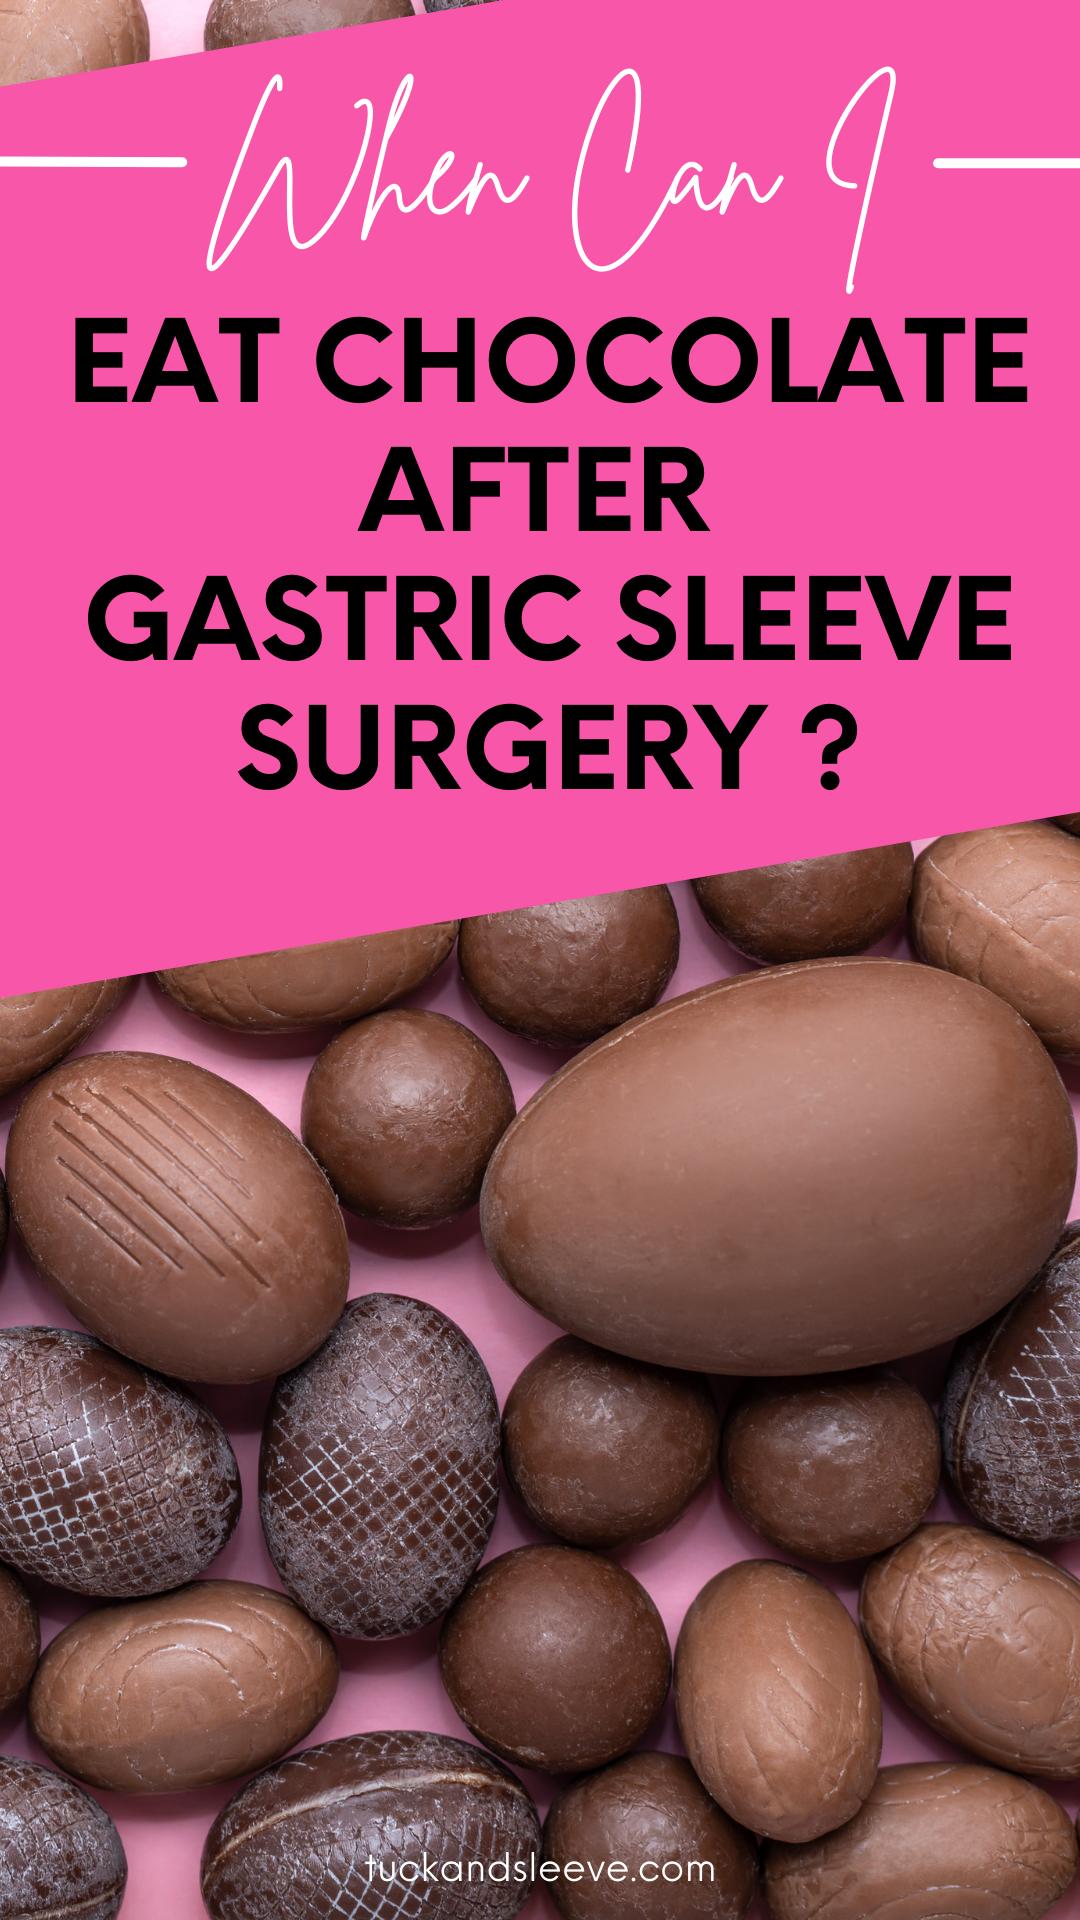 Tuck and Sleeve When Can I Eat Chocolate After Gastric Sleeve Surgery?